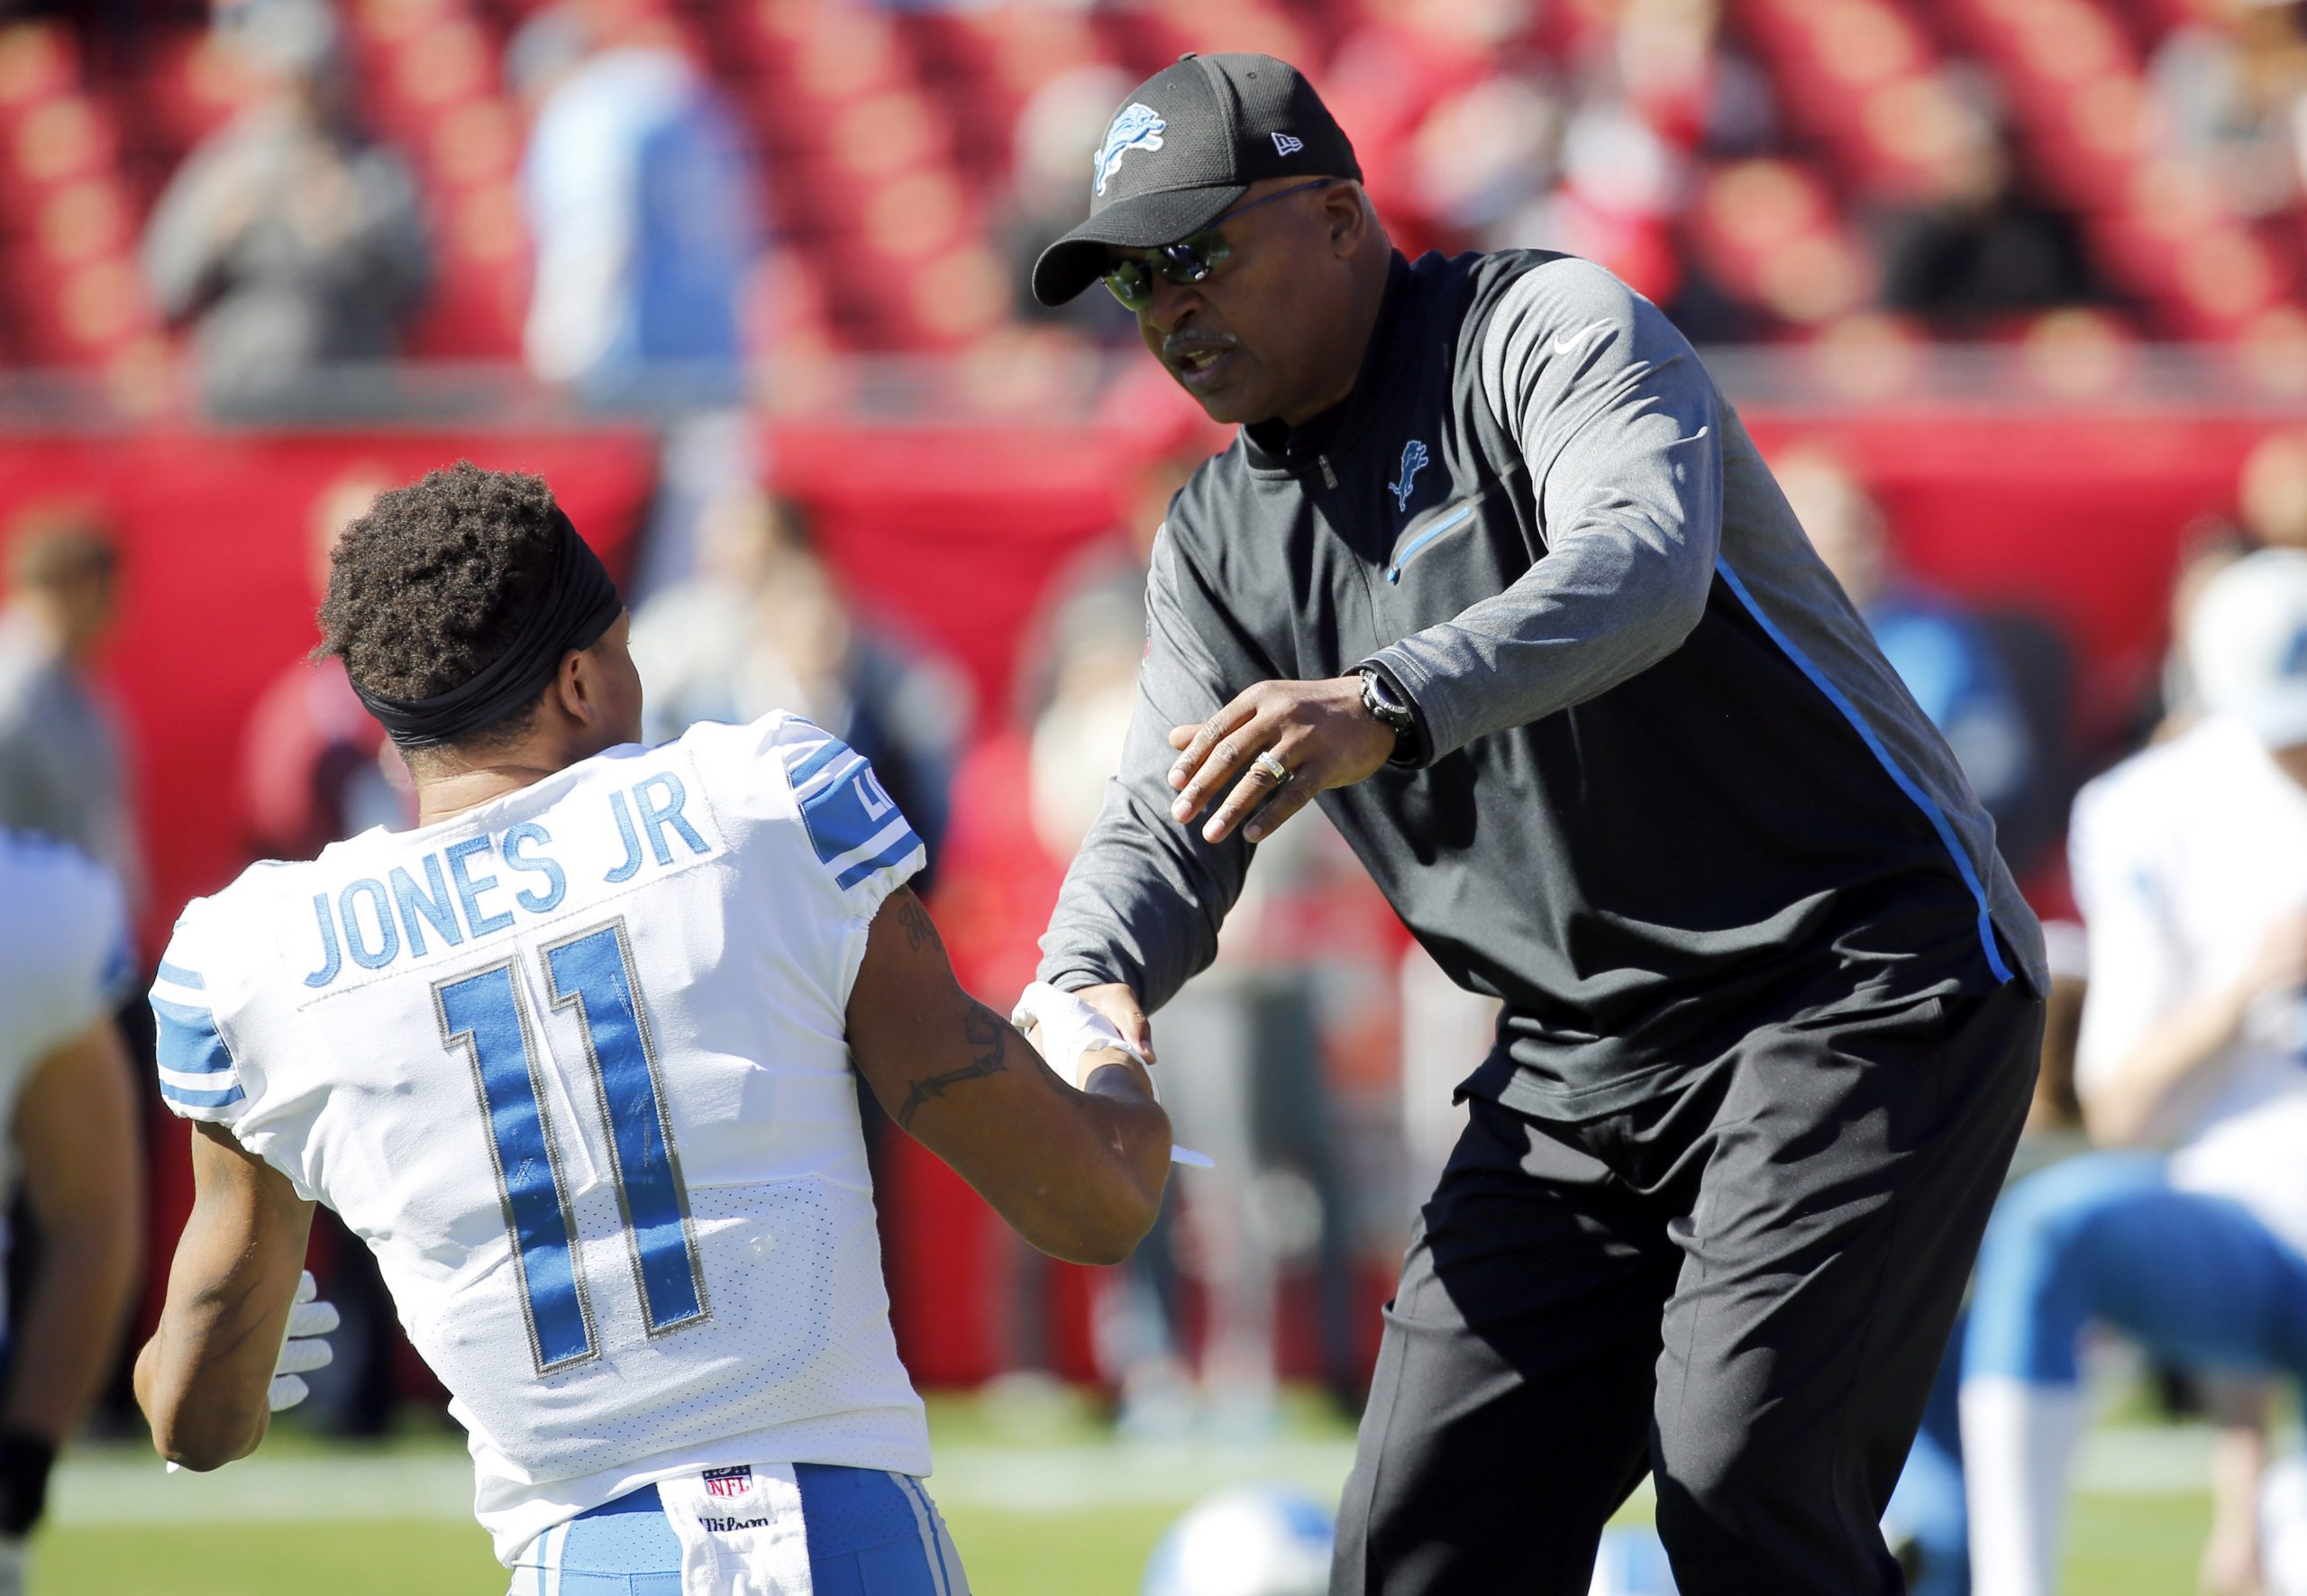 NFL: Detroit Lions at Tampa Bay Buccaneers